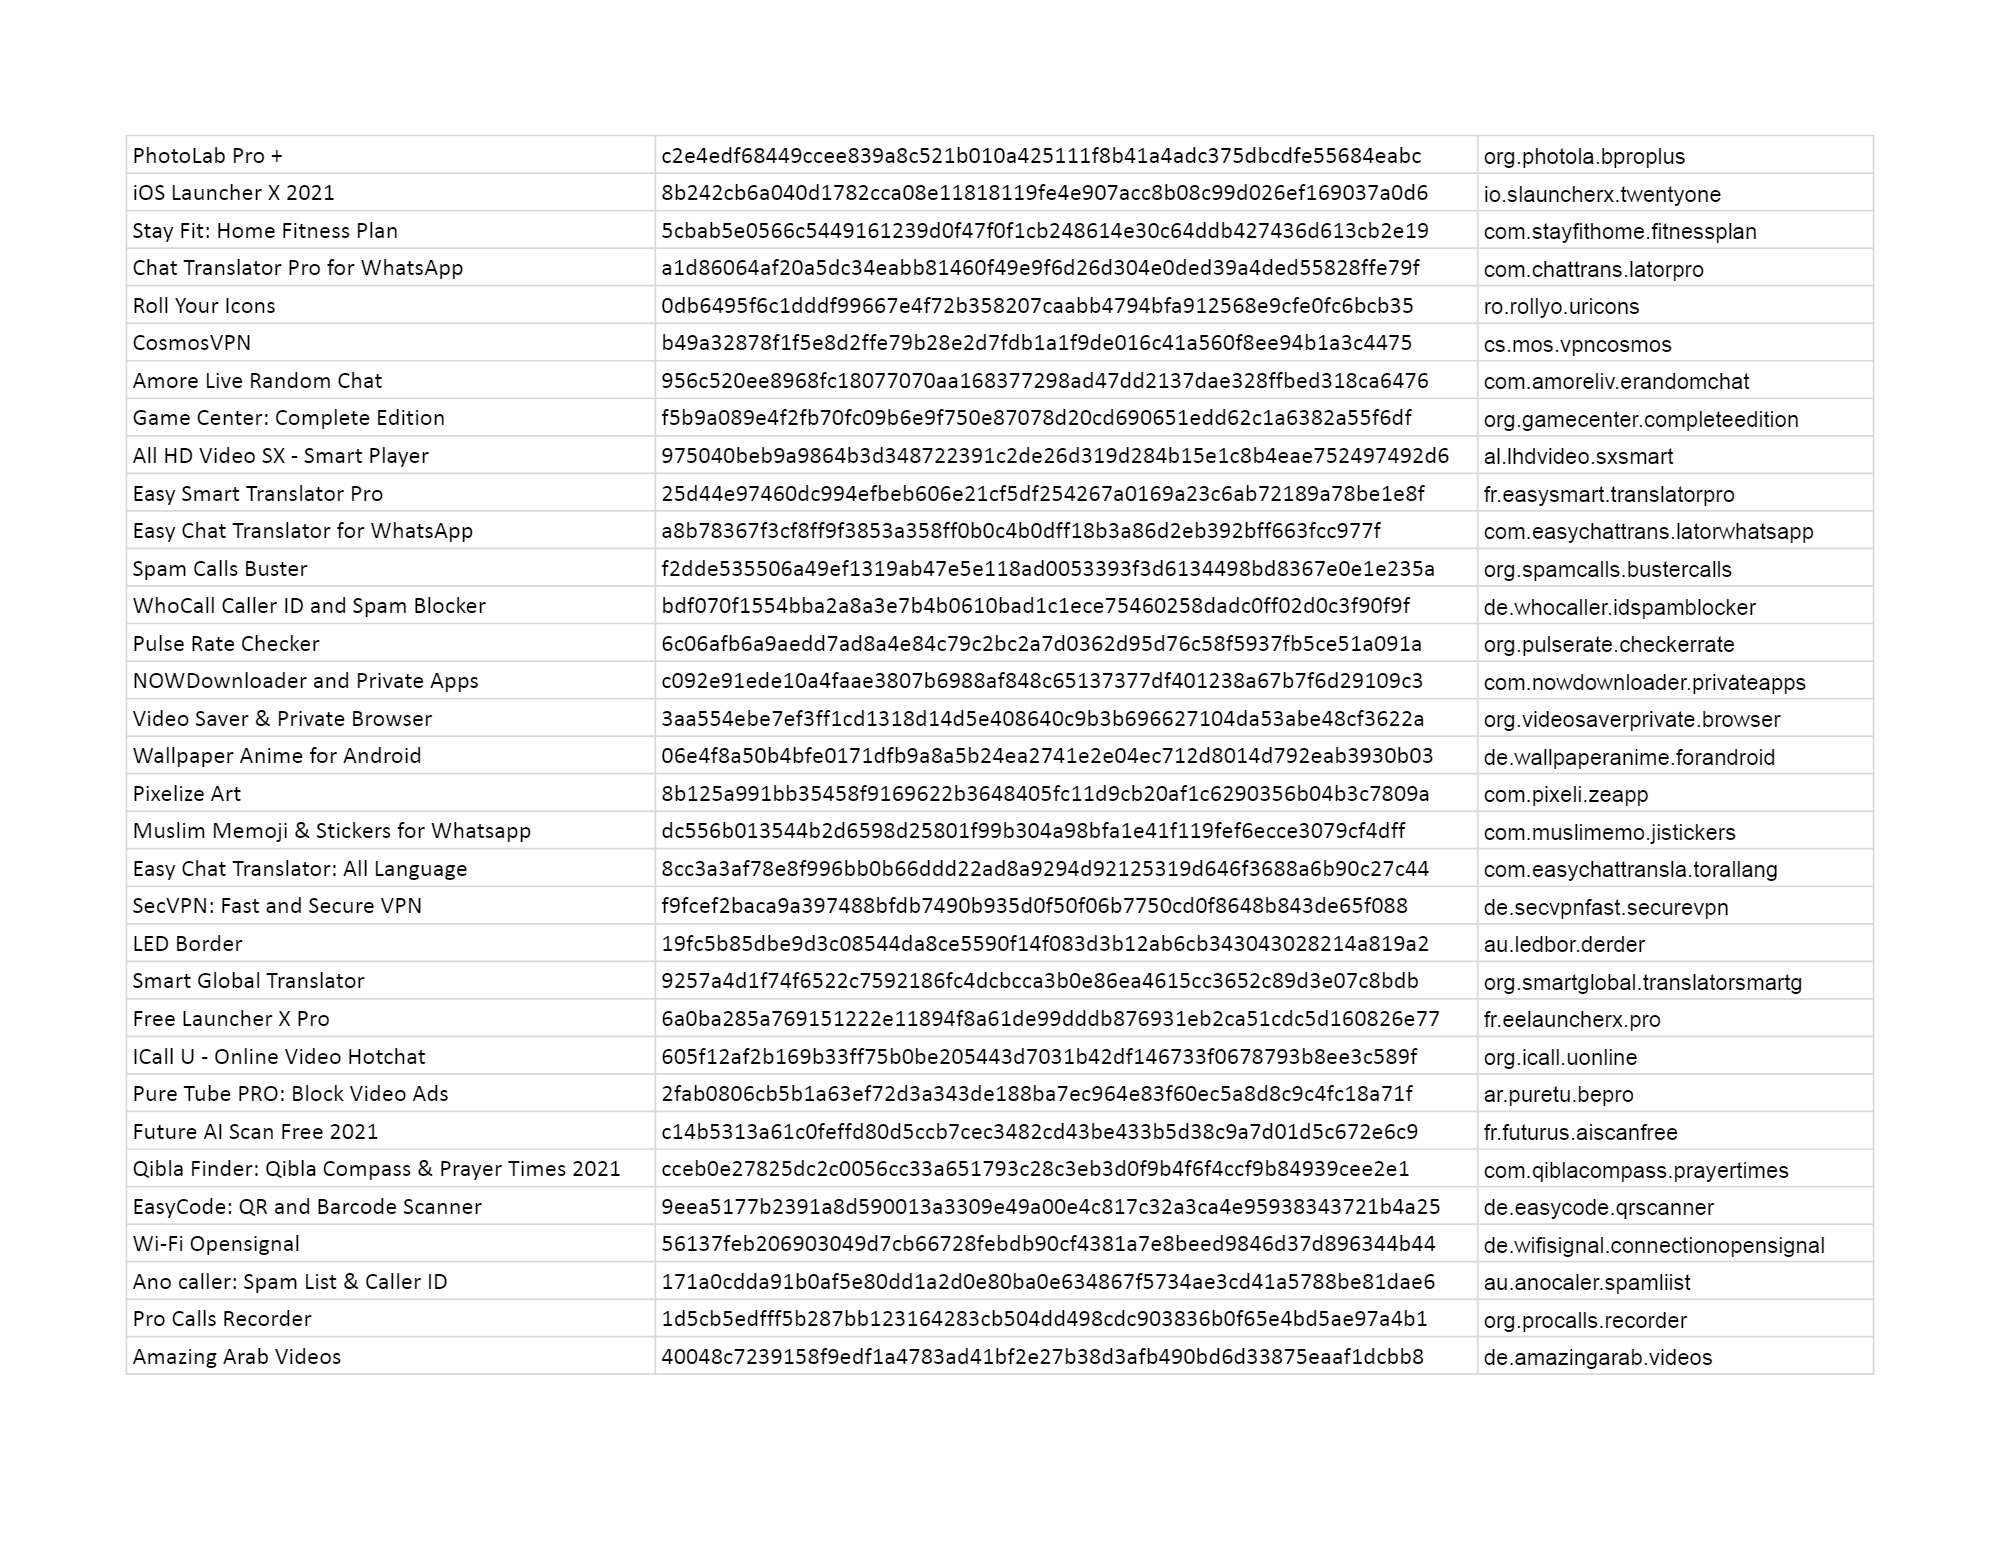 A list of apps identified with the UltimaSMS scam.